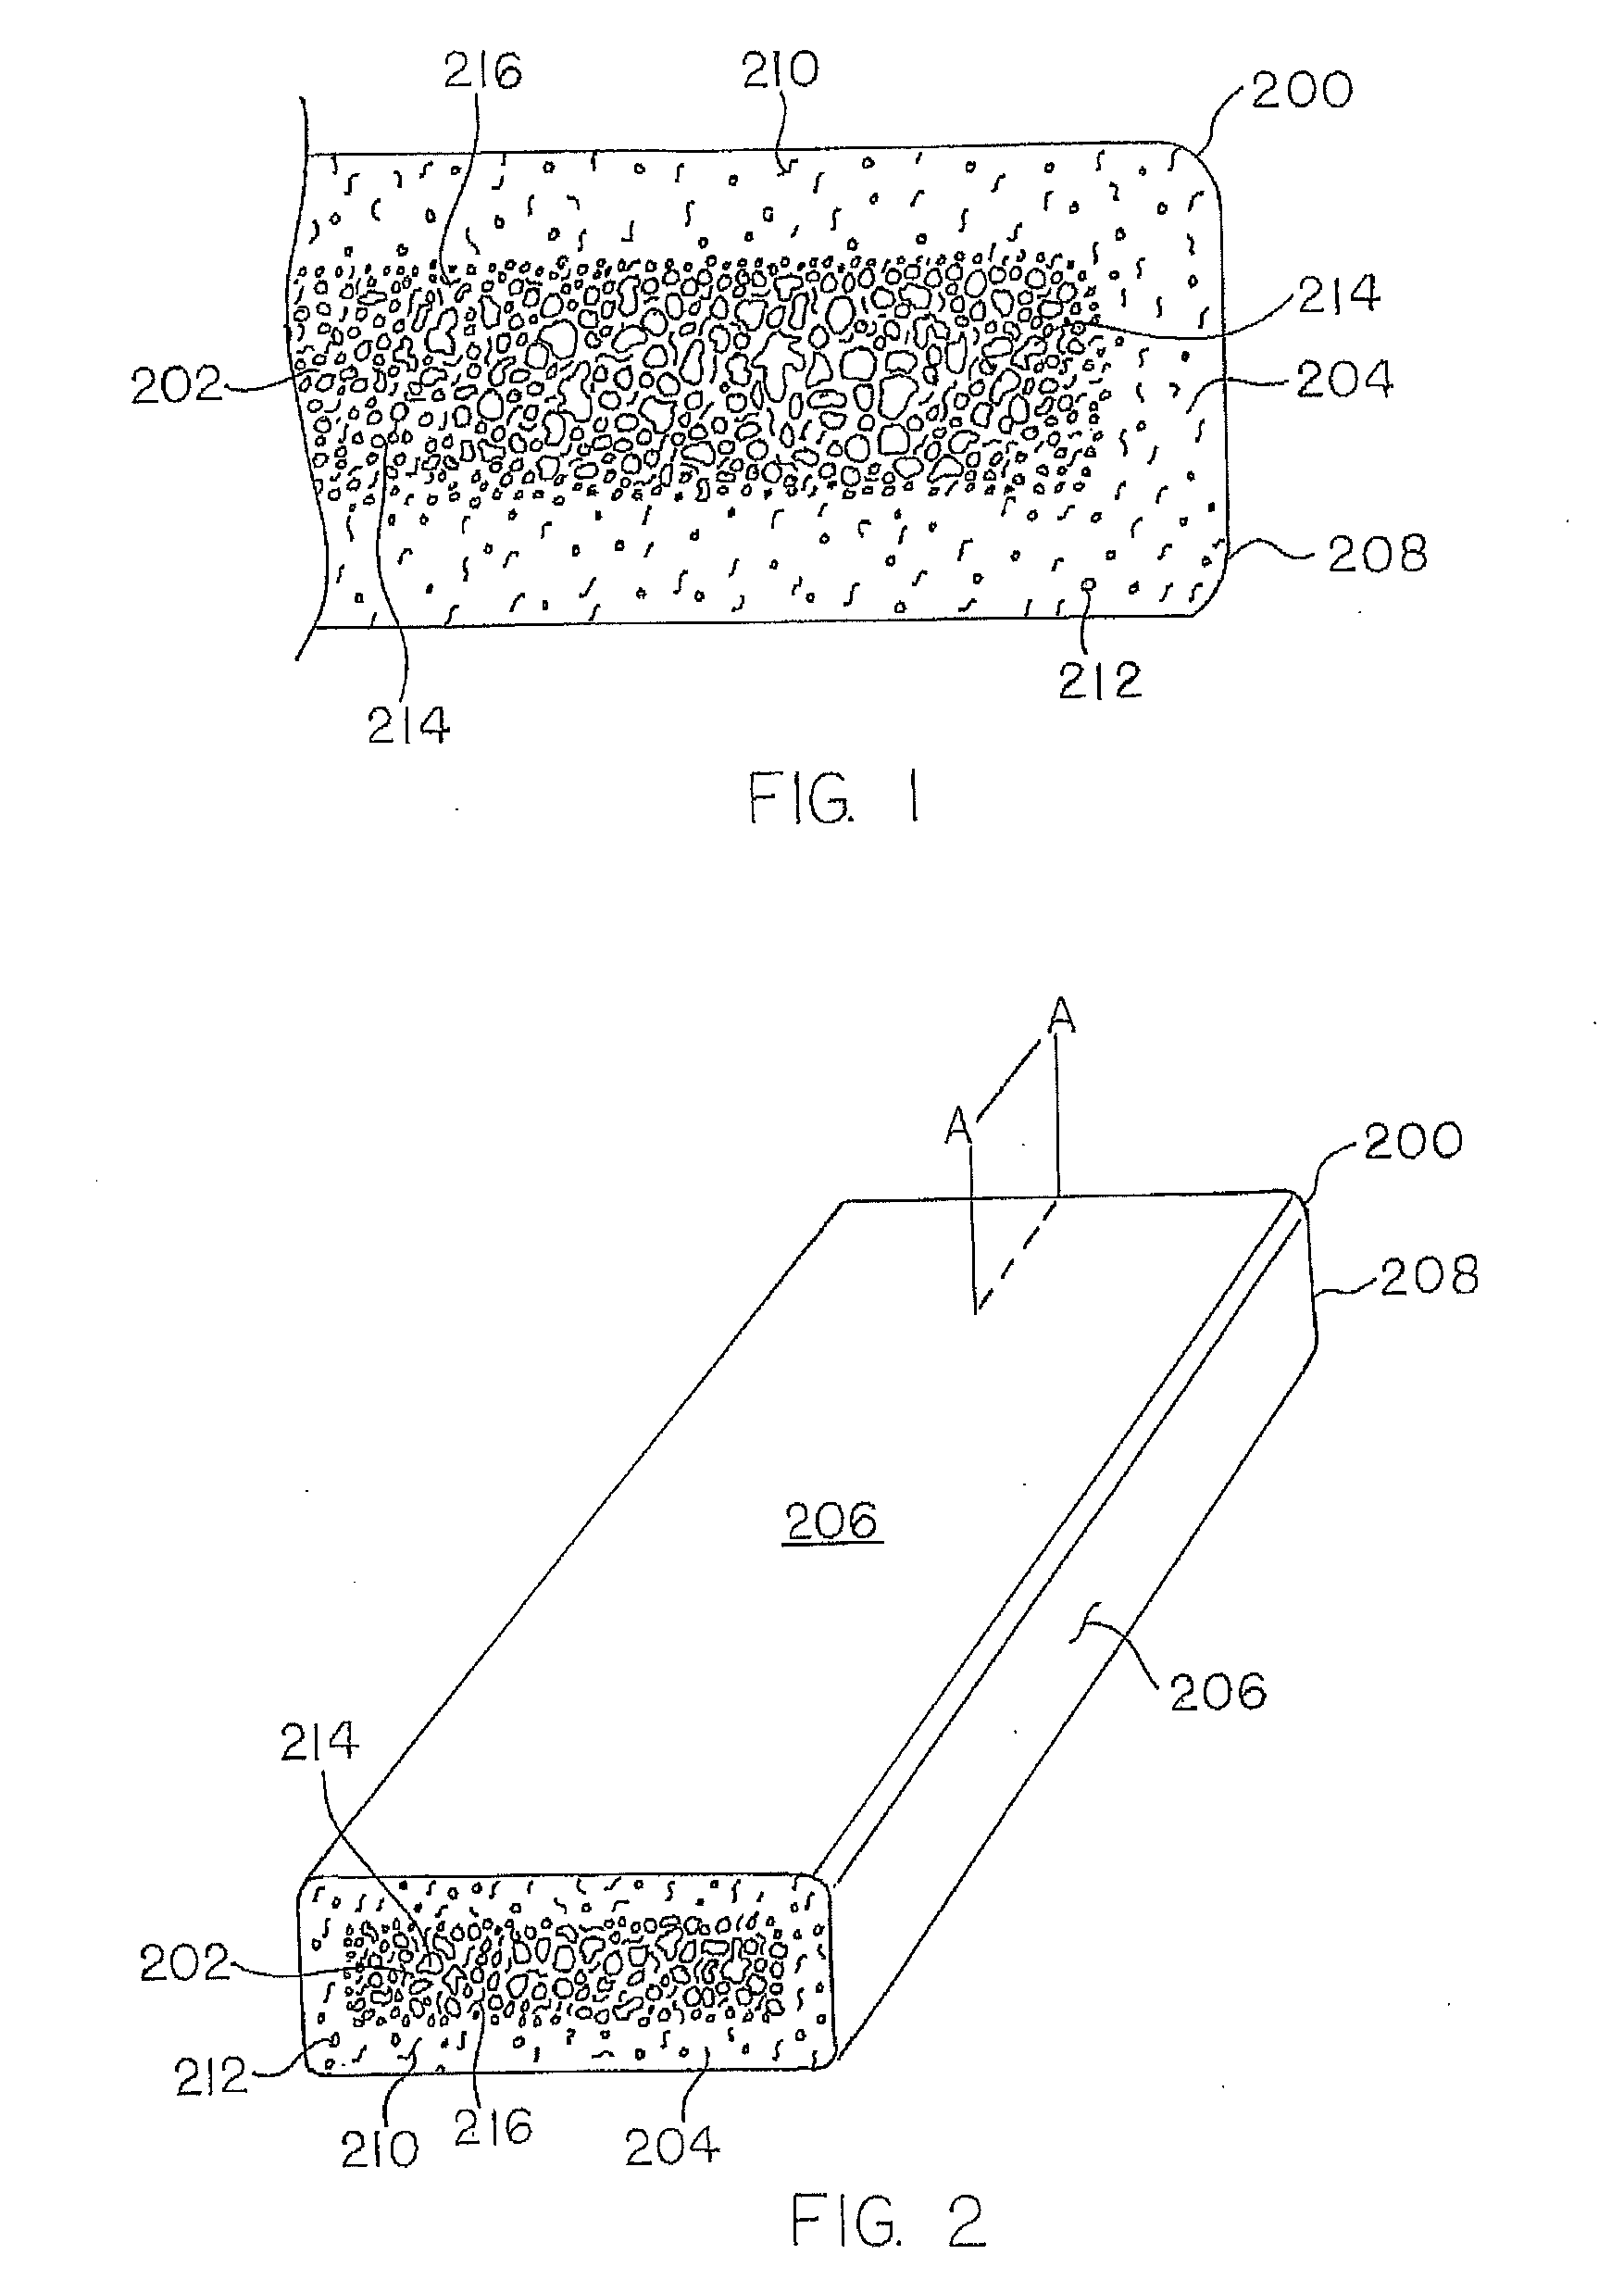 Method of making cellulosic filled thermoplastic composites of an anhydride containing copolymer